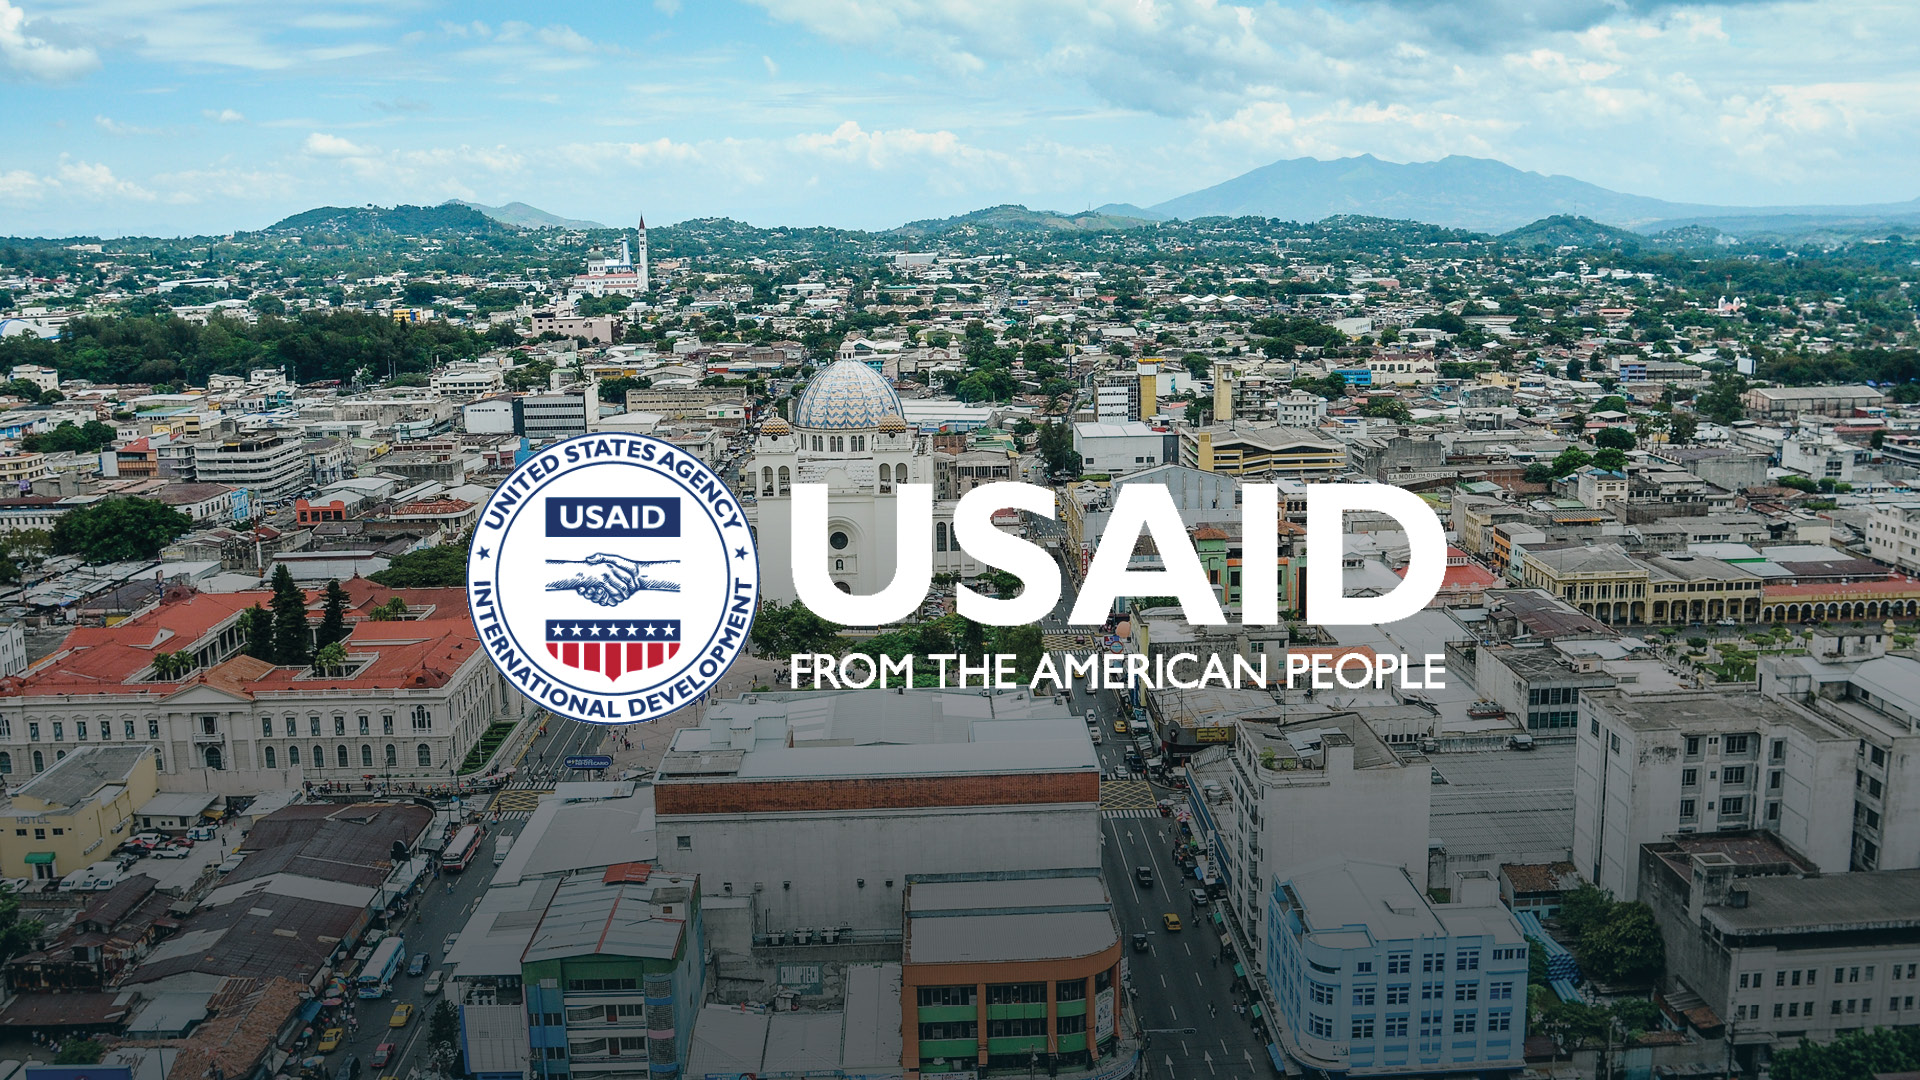 An aerial view of the city of San Salvador with USAID's logo laid over the top.